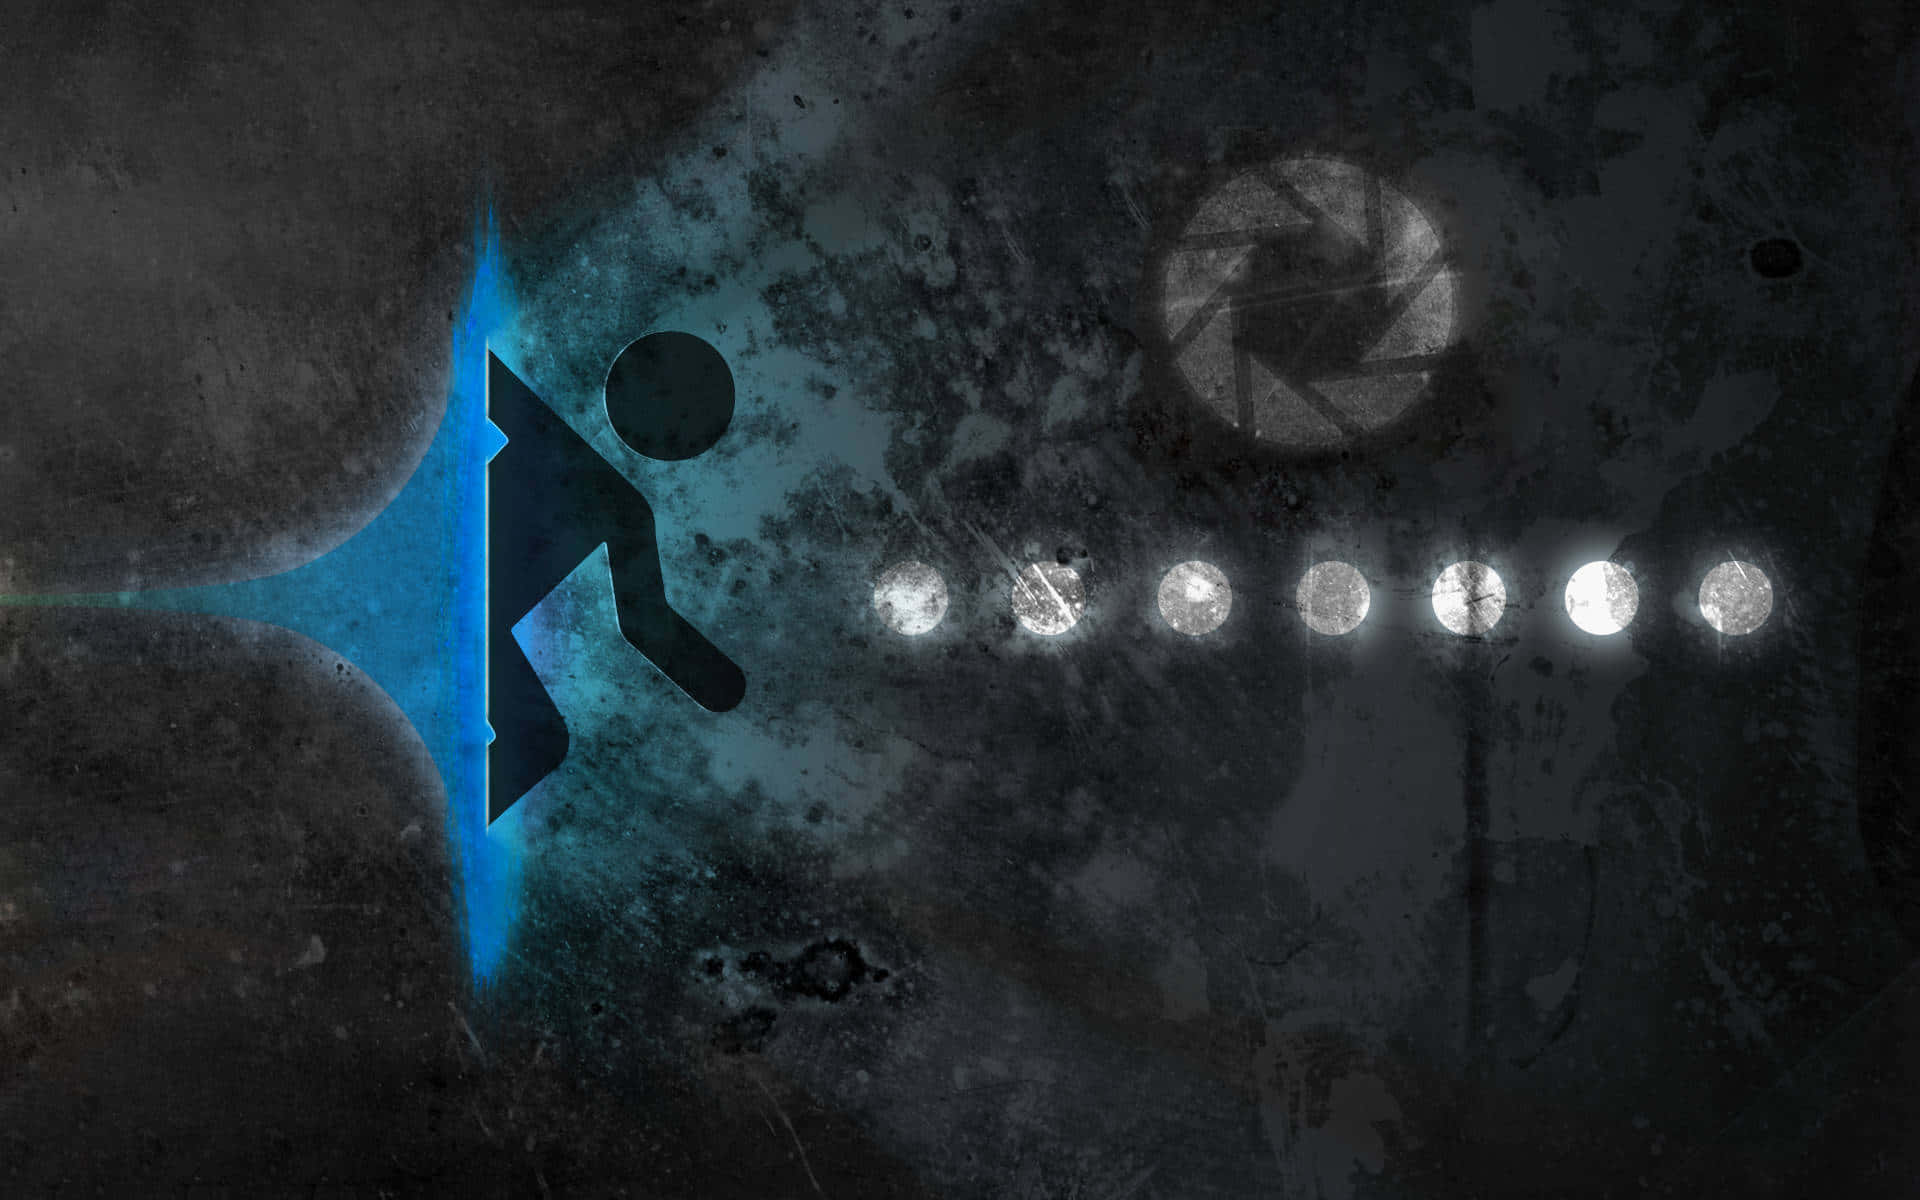 Test your skills and choose your destiny in the captivating world of Portal